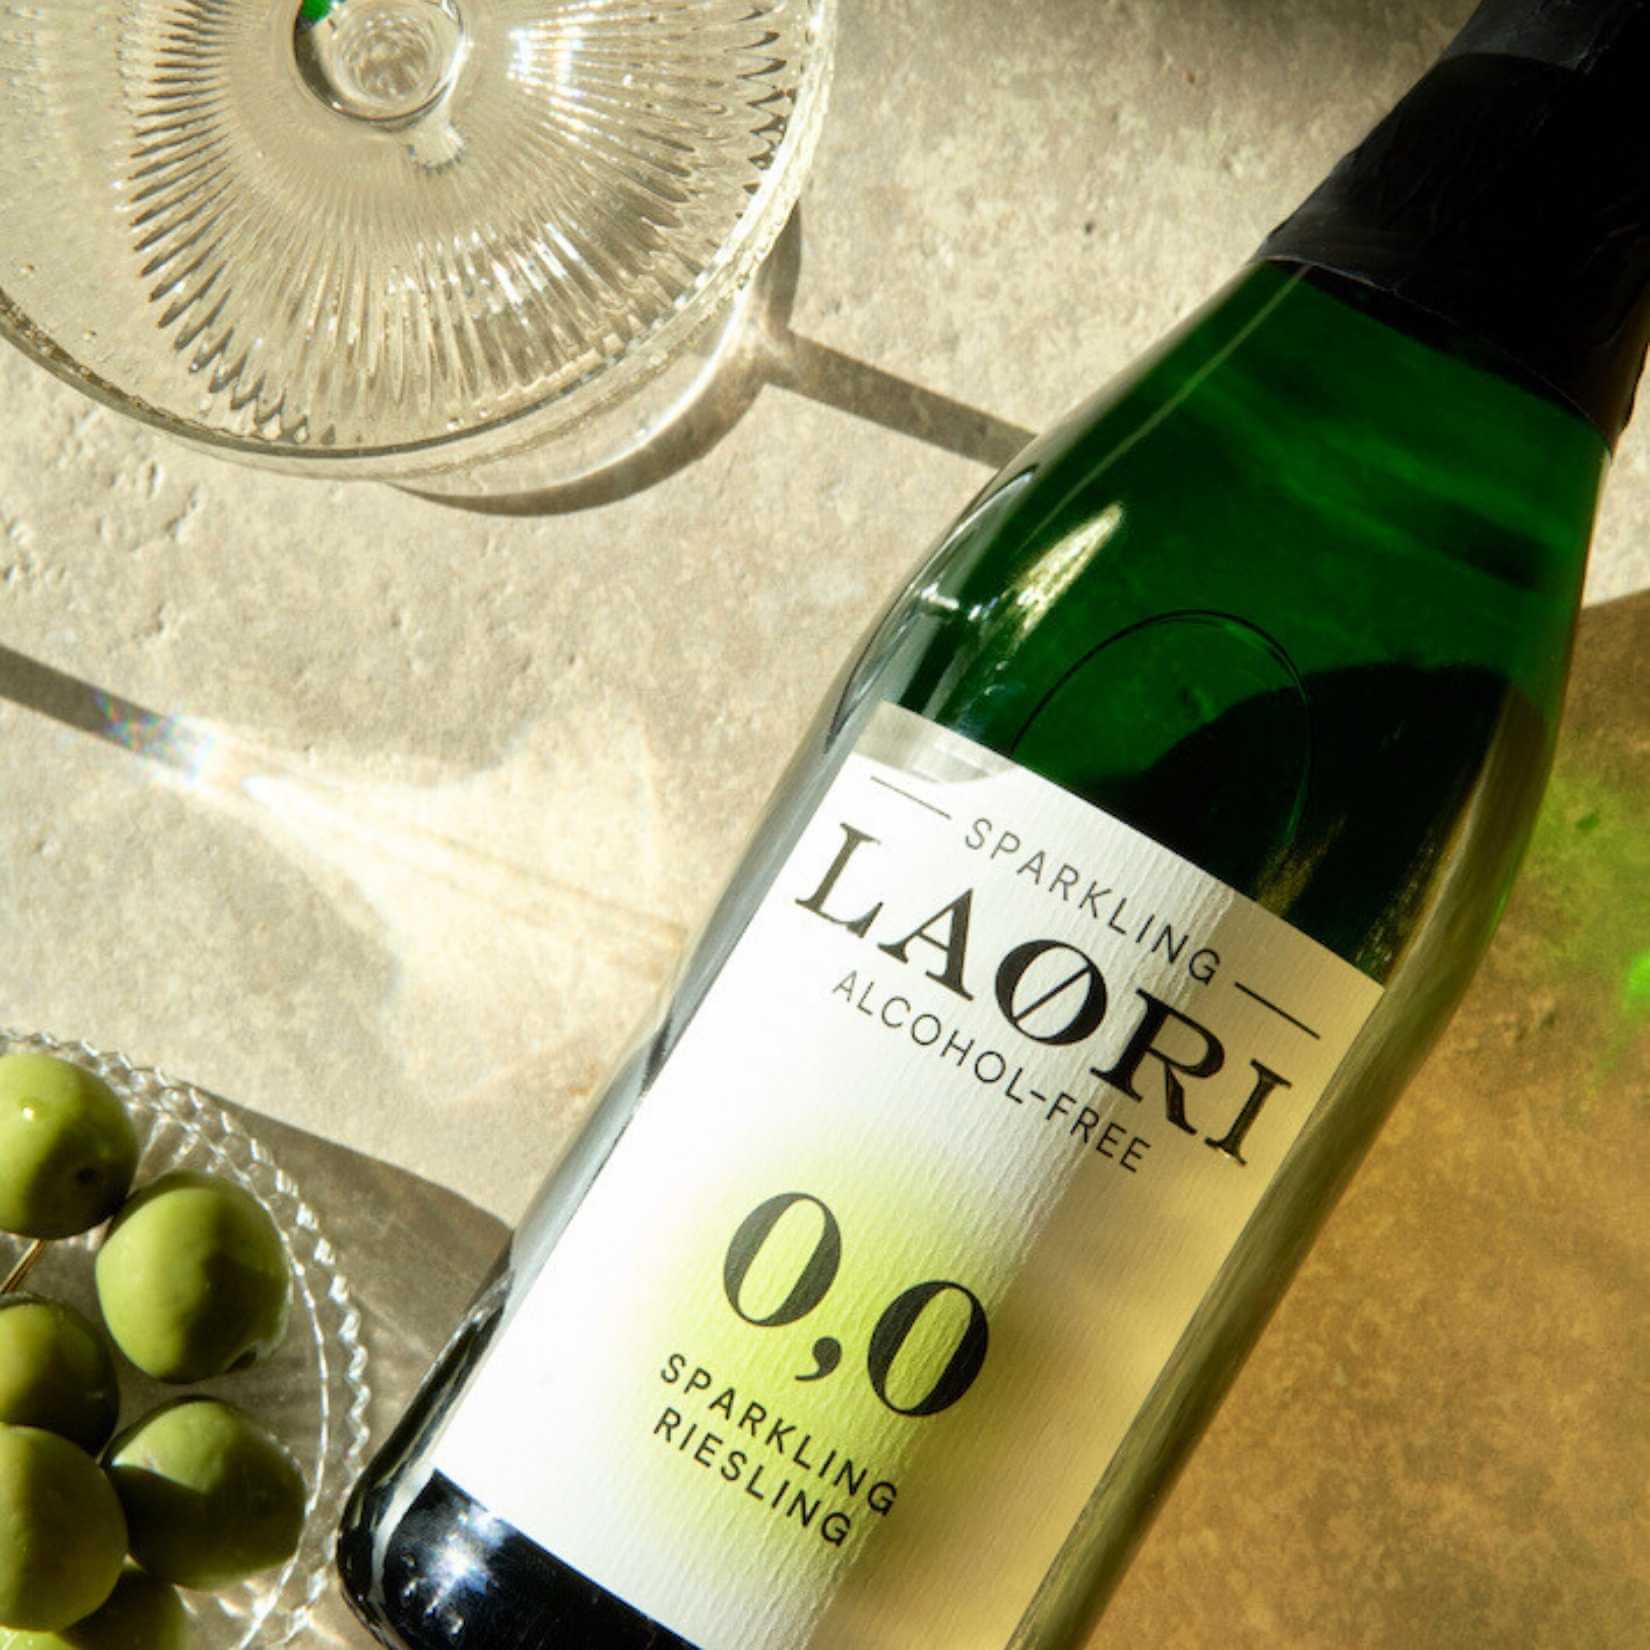 Laori Spice No 2 + Mousserende Riesling